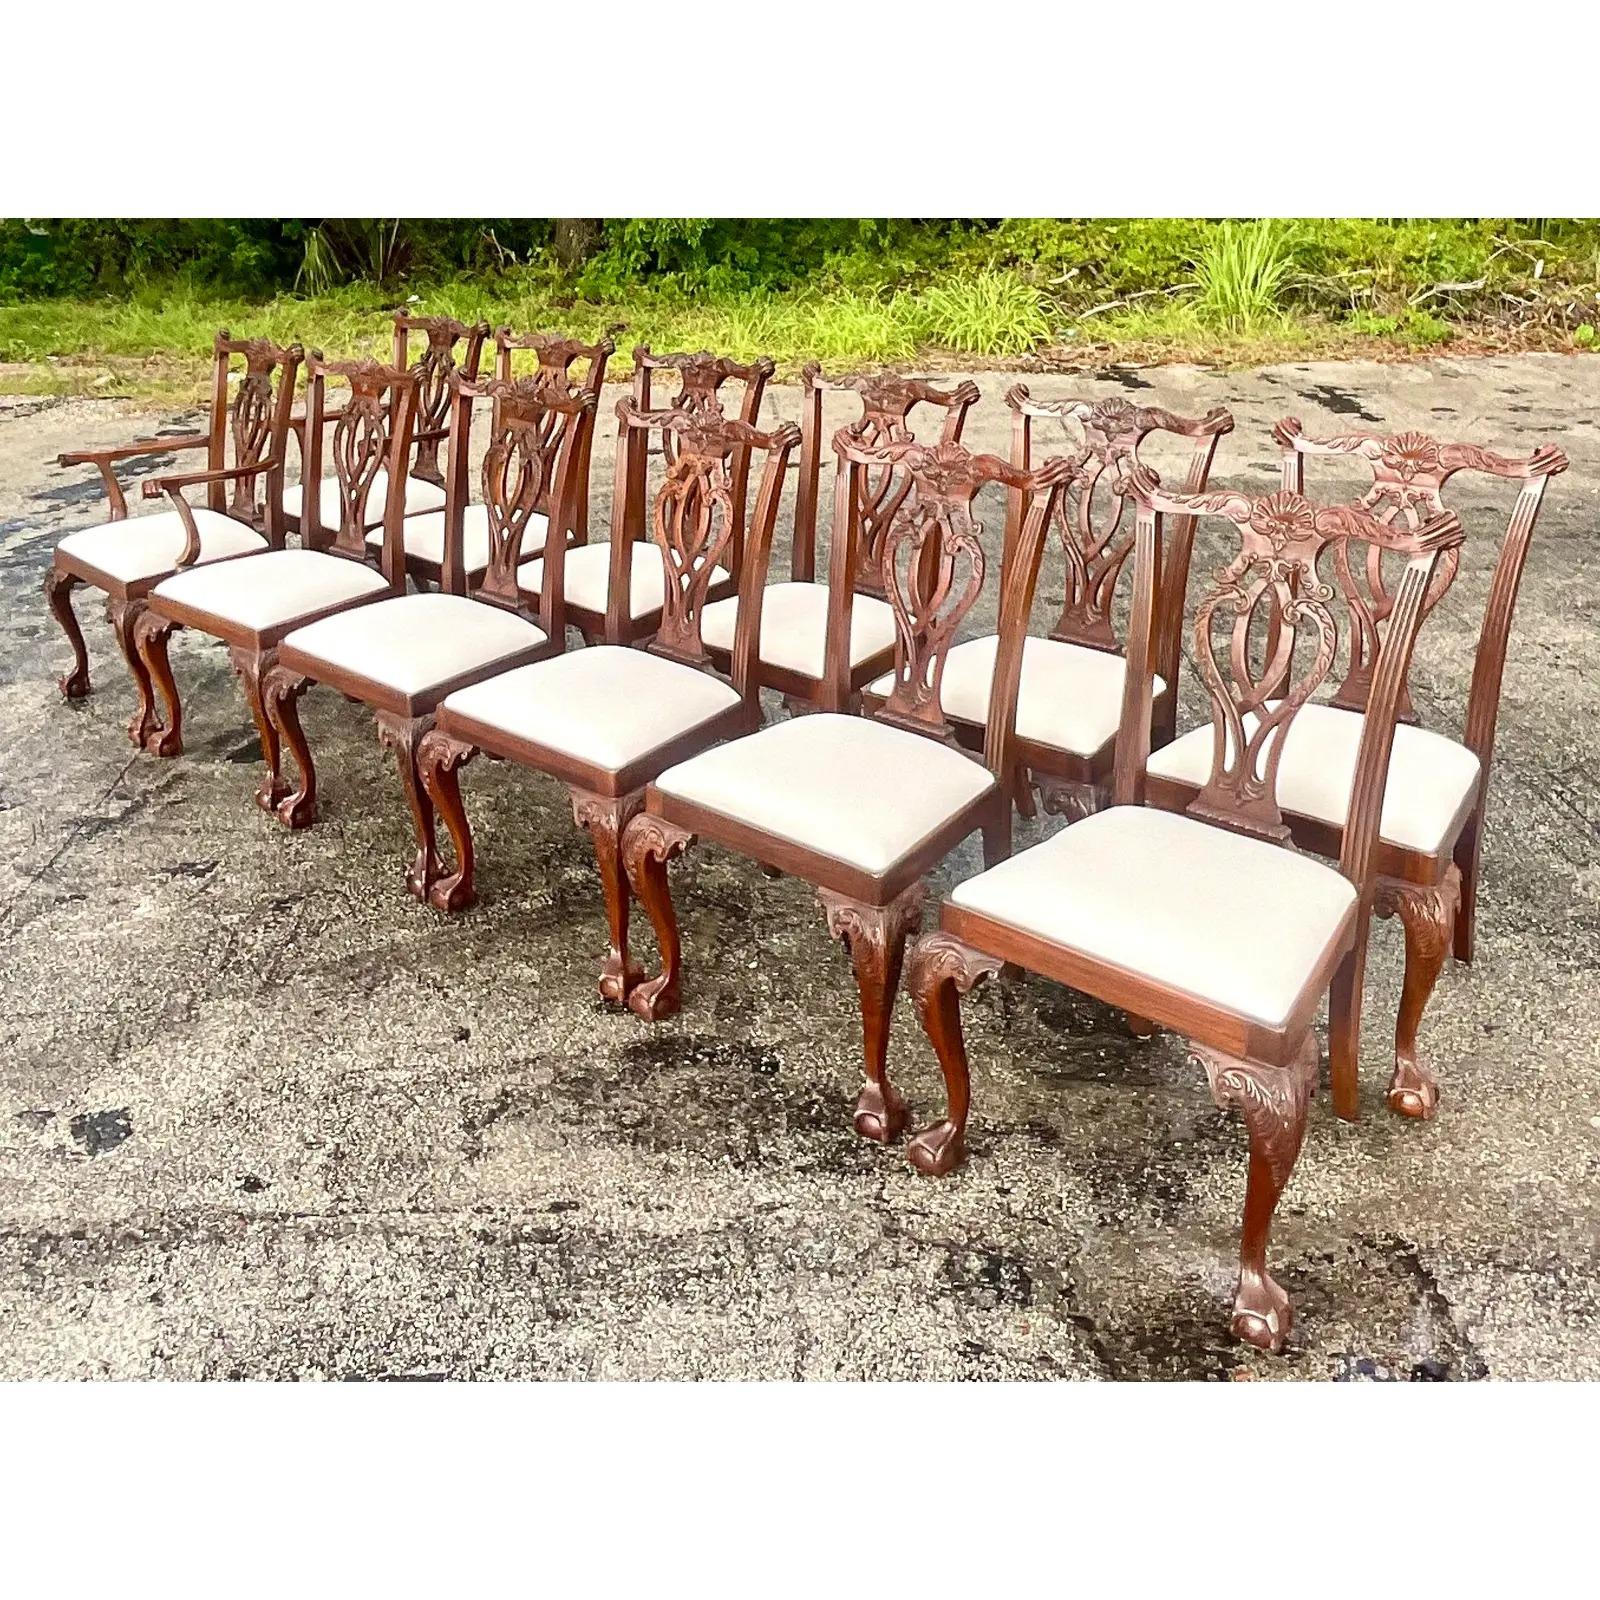 20th Century Vintage Regency Carved Mahogany Chippendale Dining Chairs, Set of 12